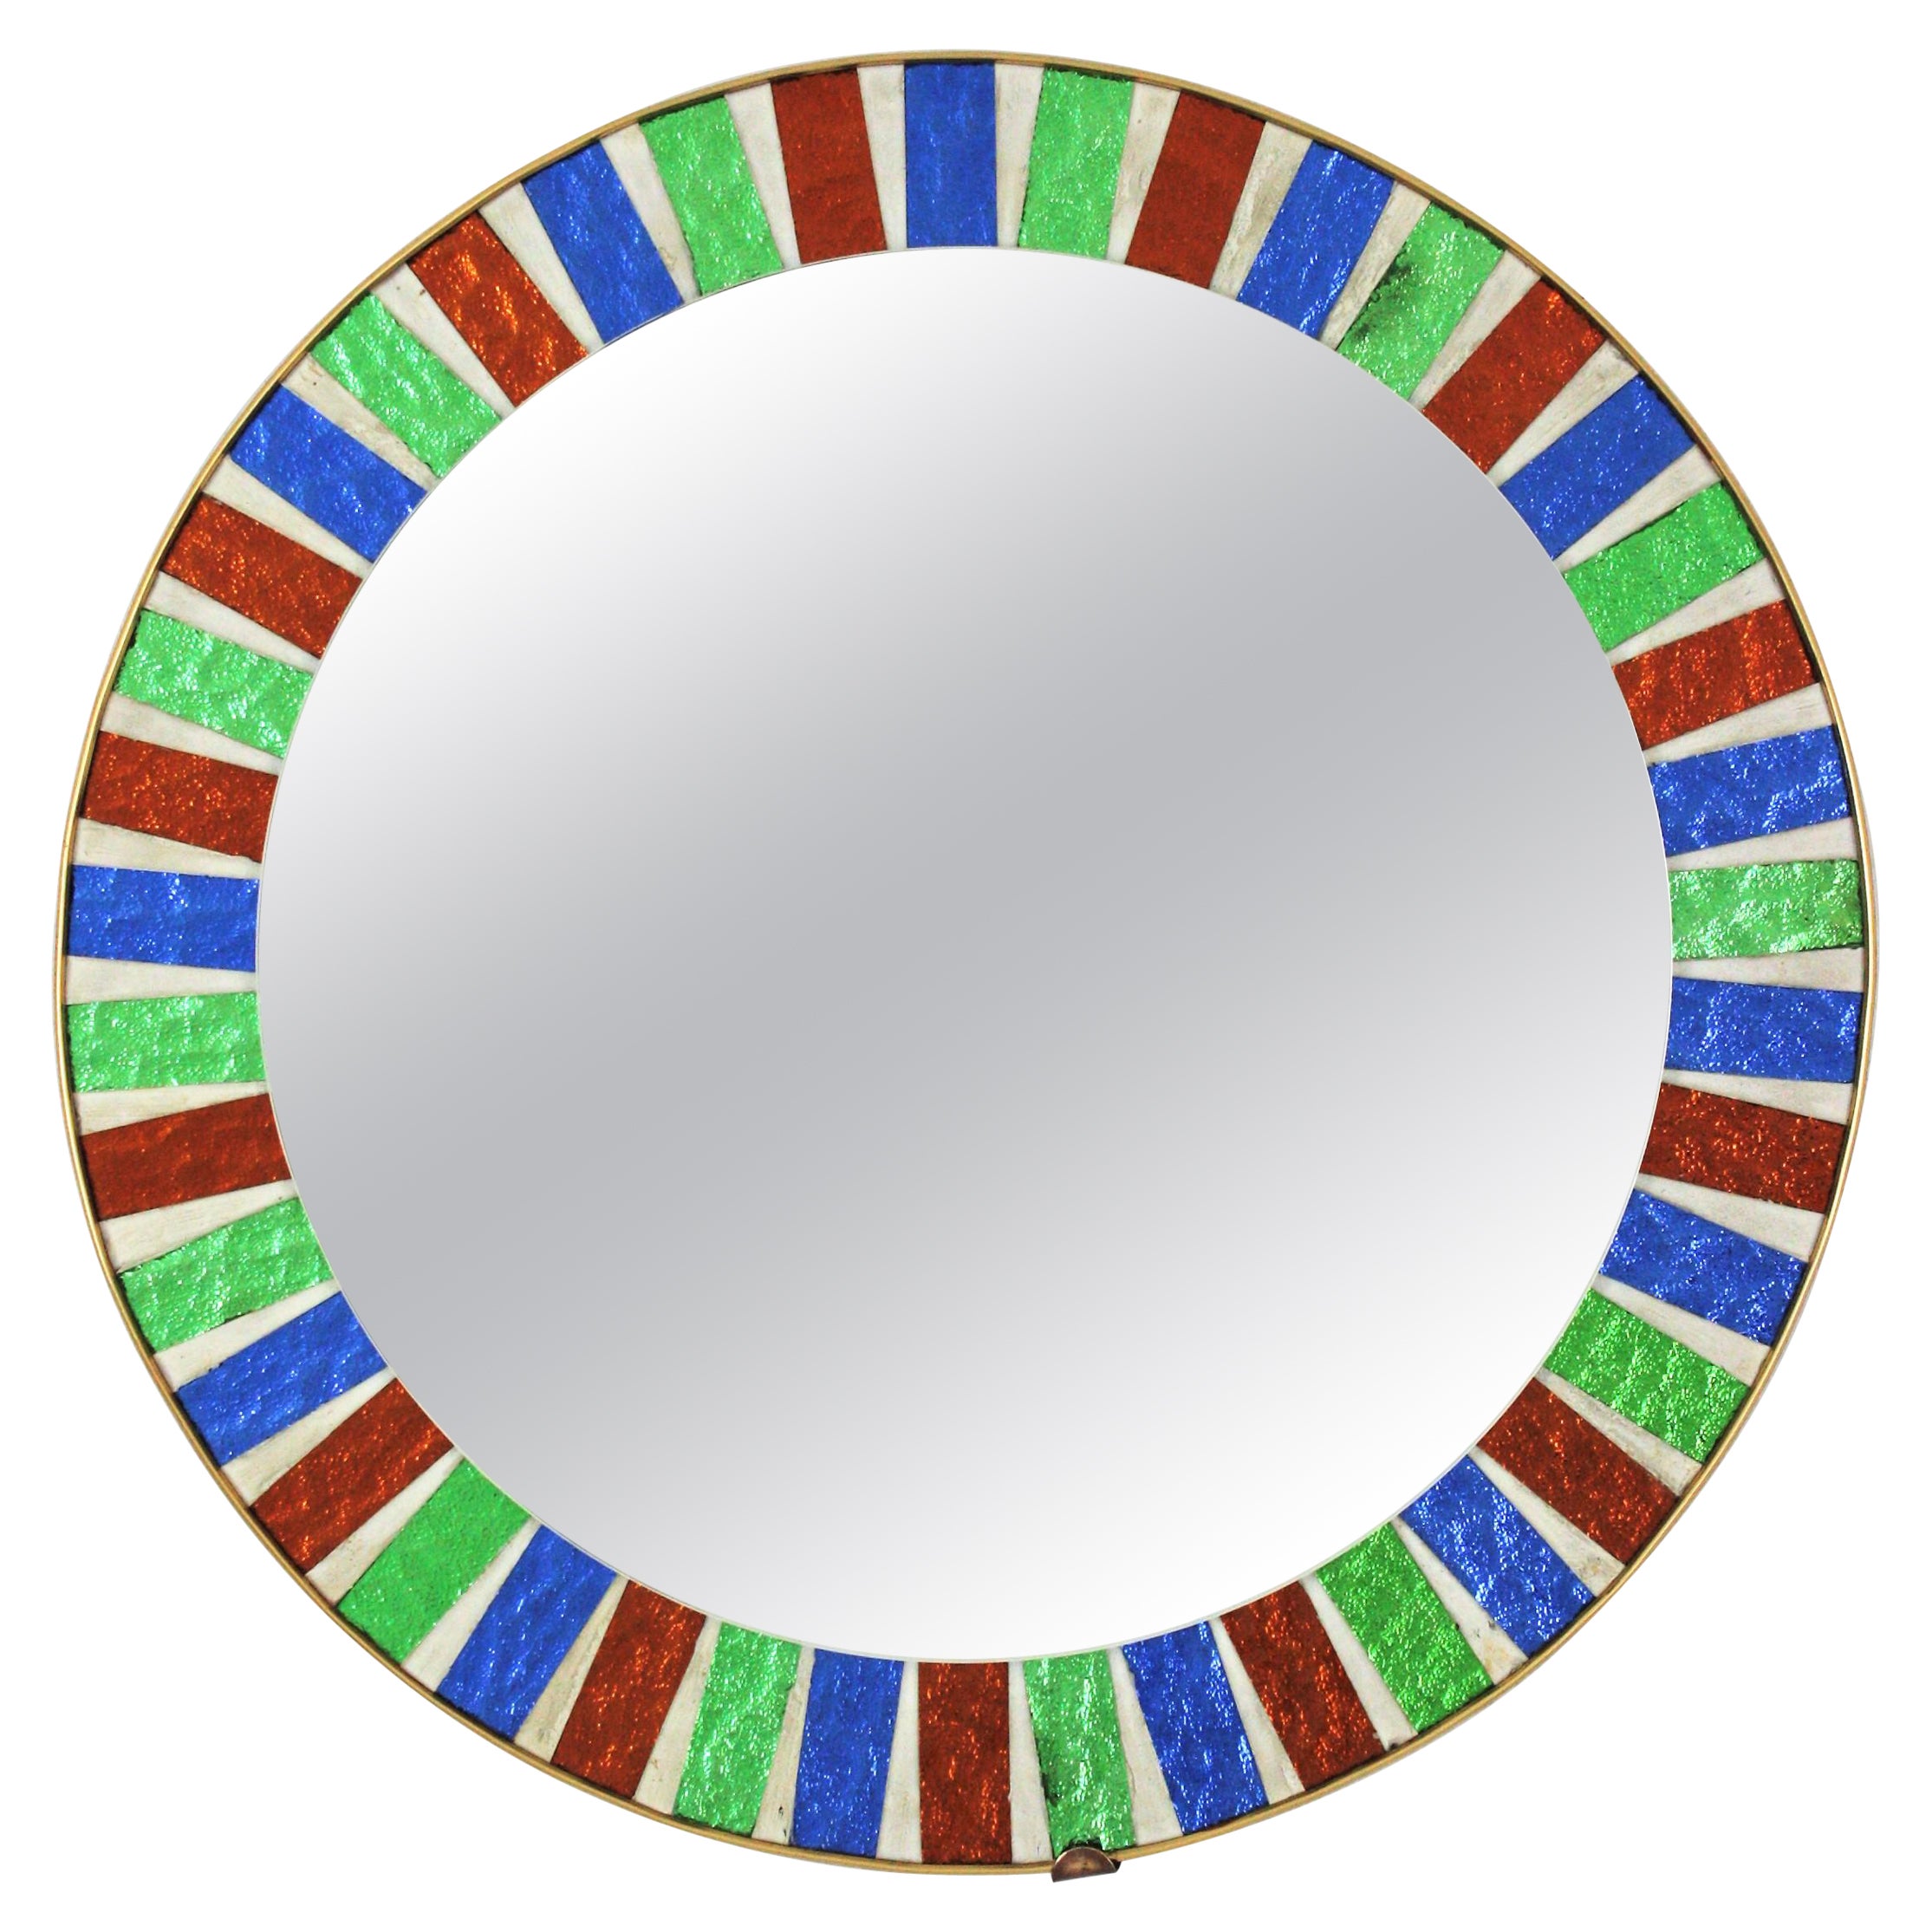 Round Sunburst Mirror with Multi Color Glass Mosaic Frame For Sale